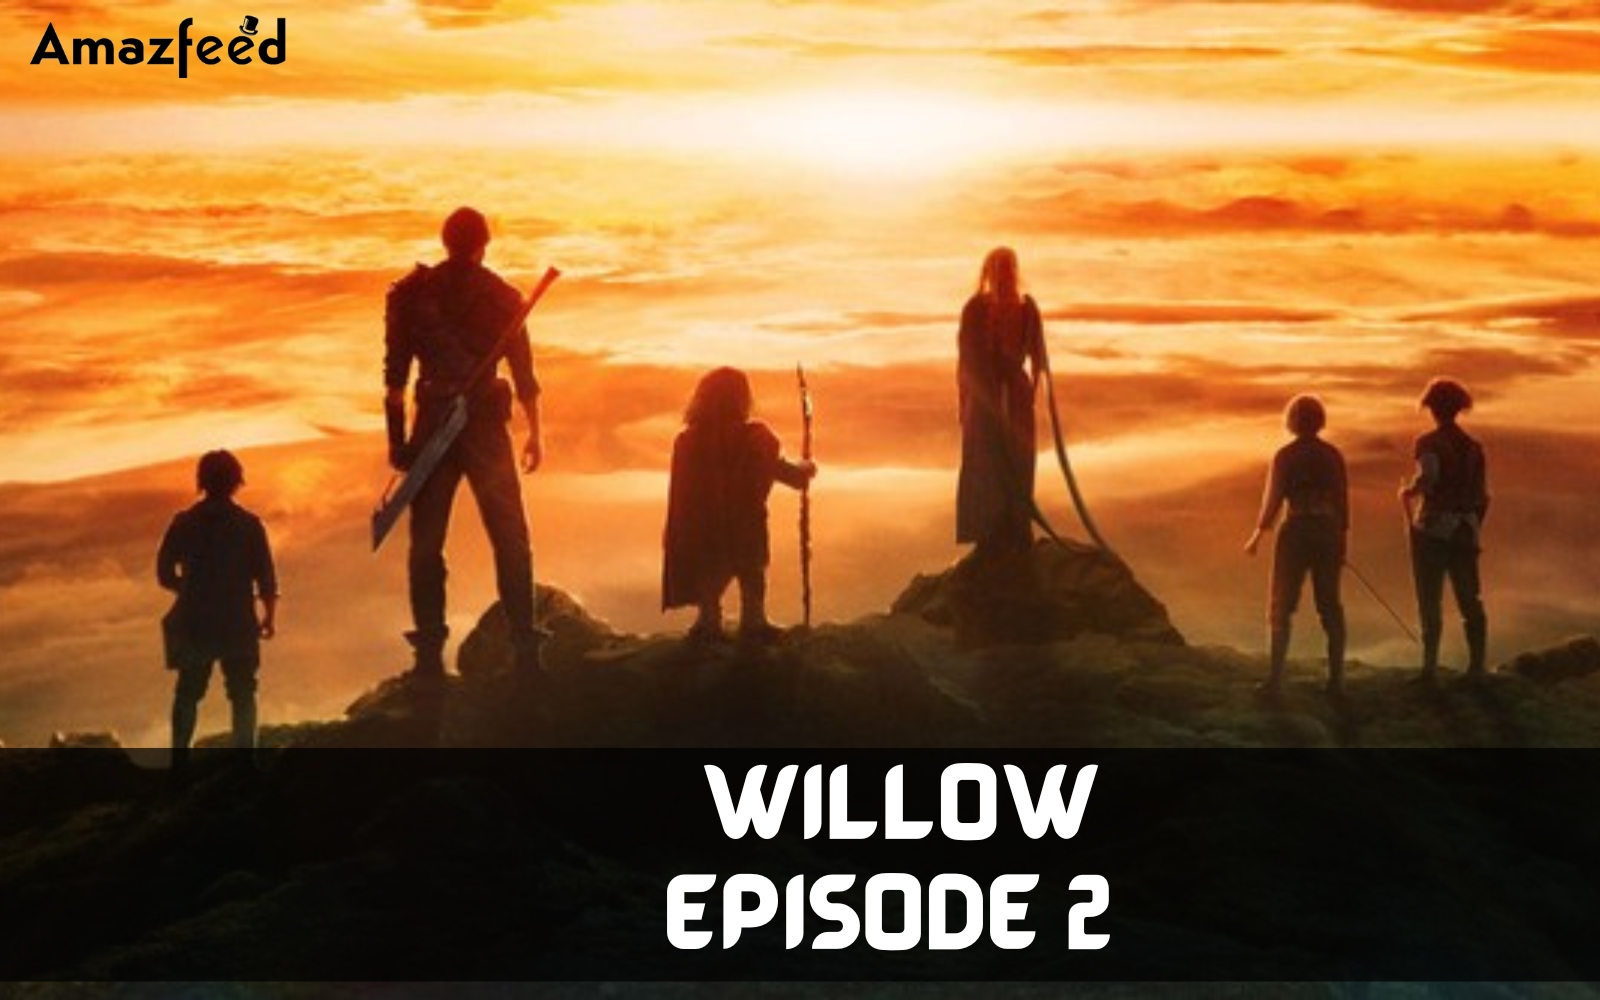 Willow Episode 2